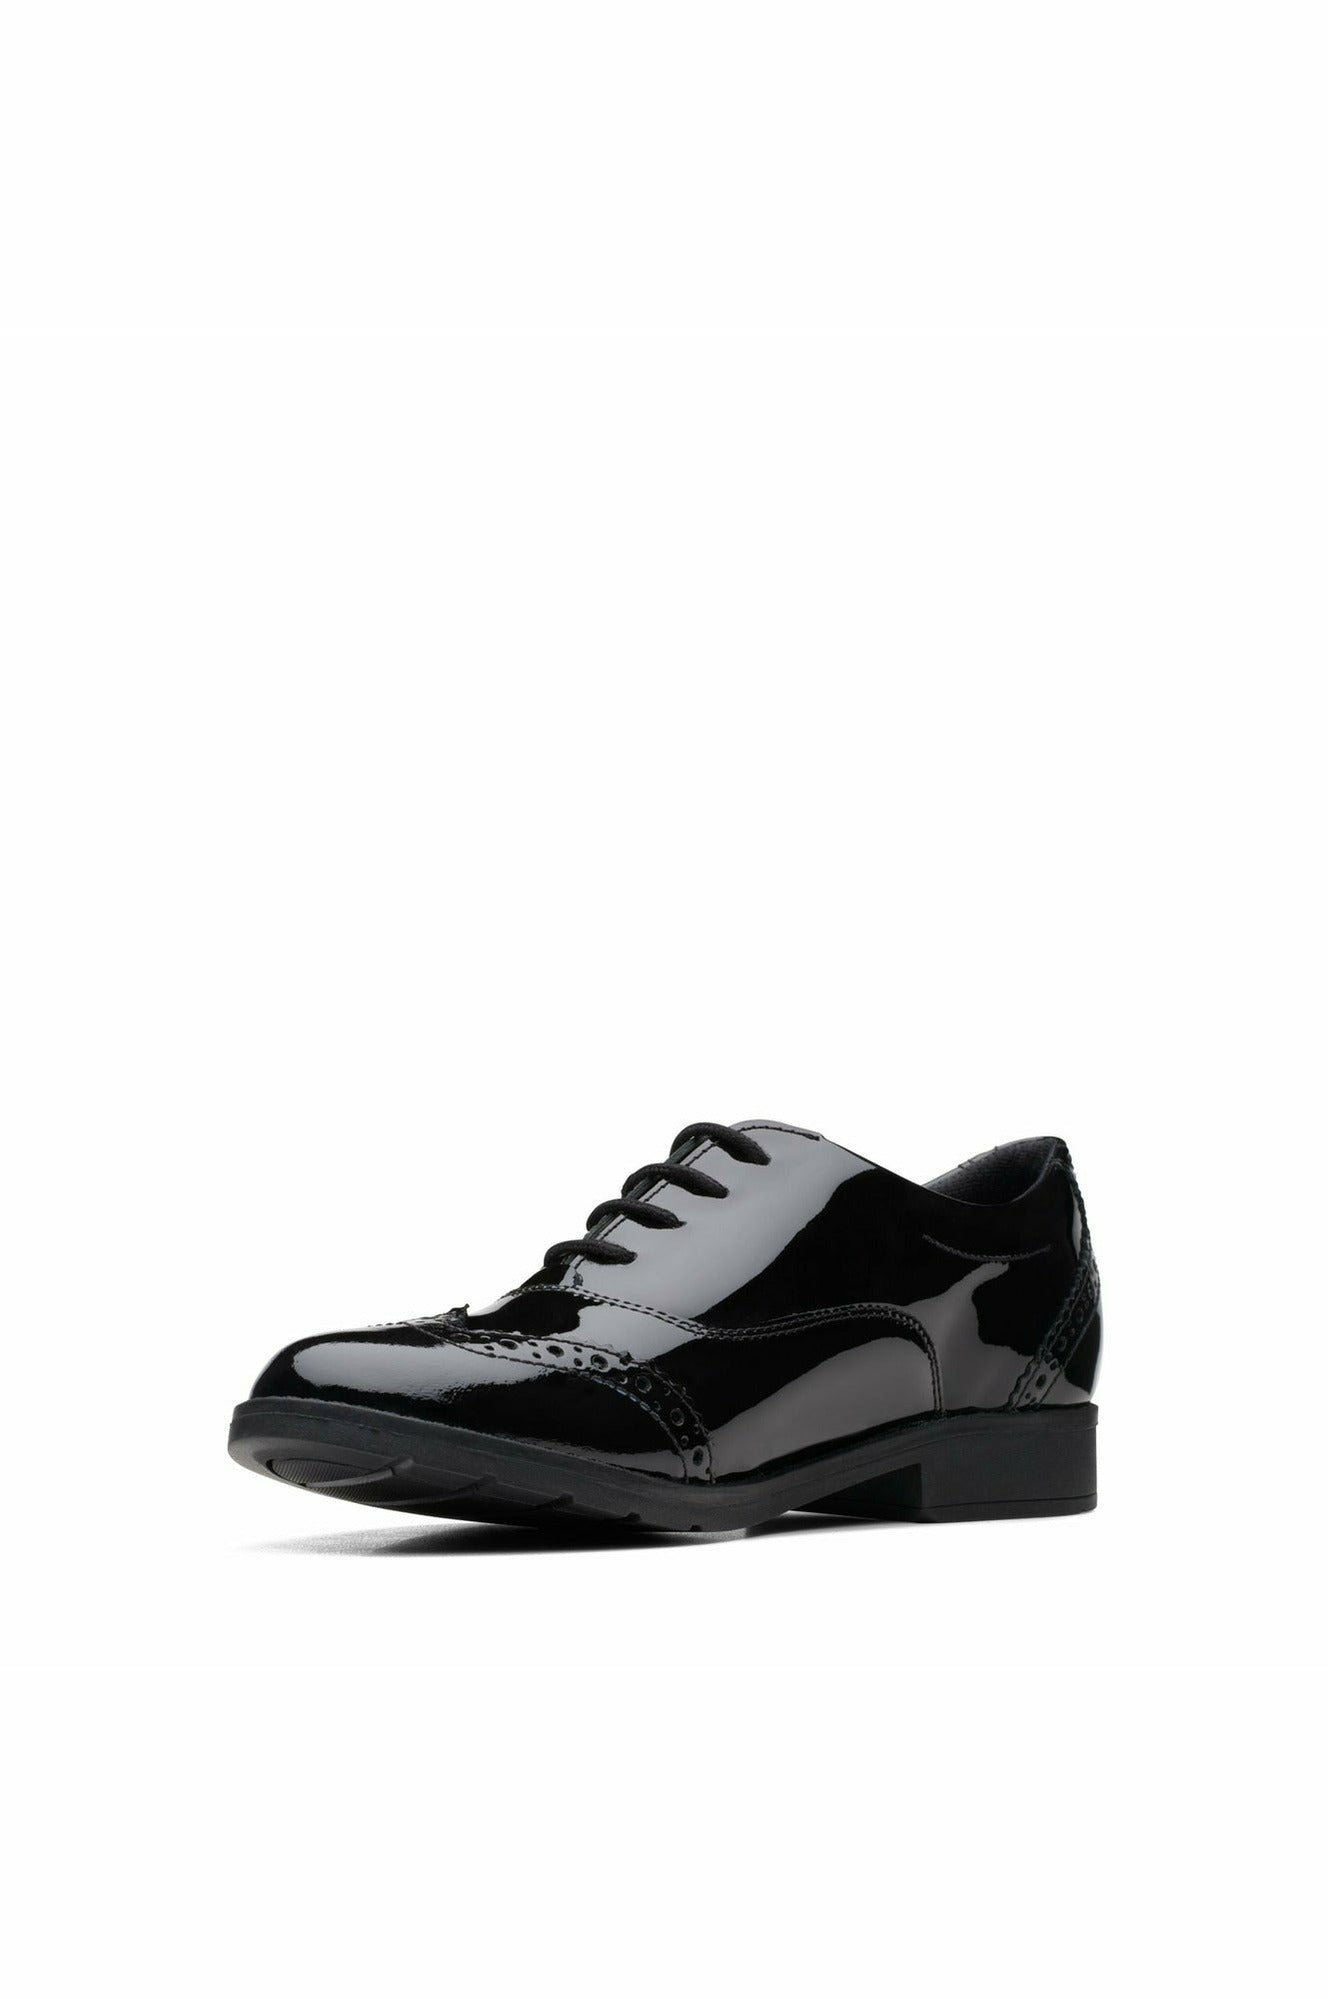 Clarks Aubrie Tap Youth black patent